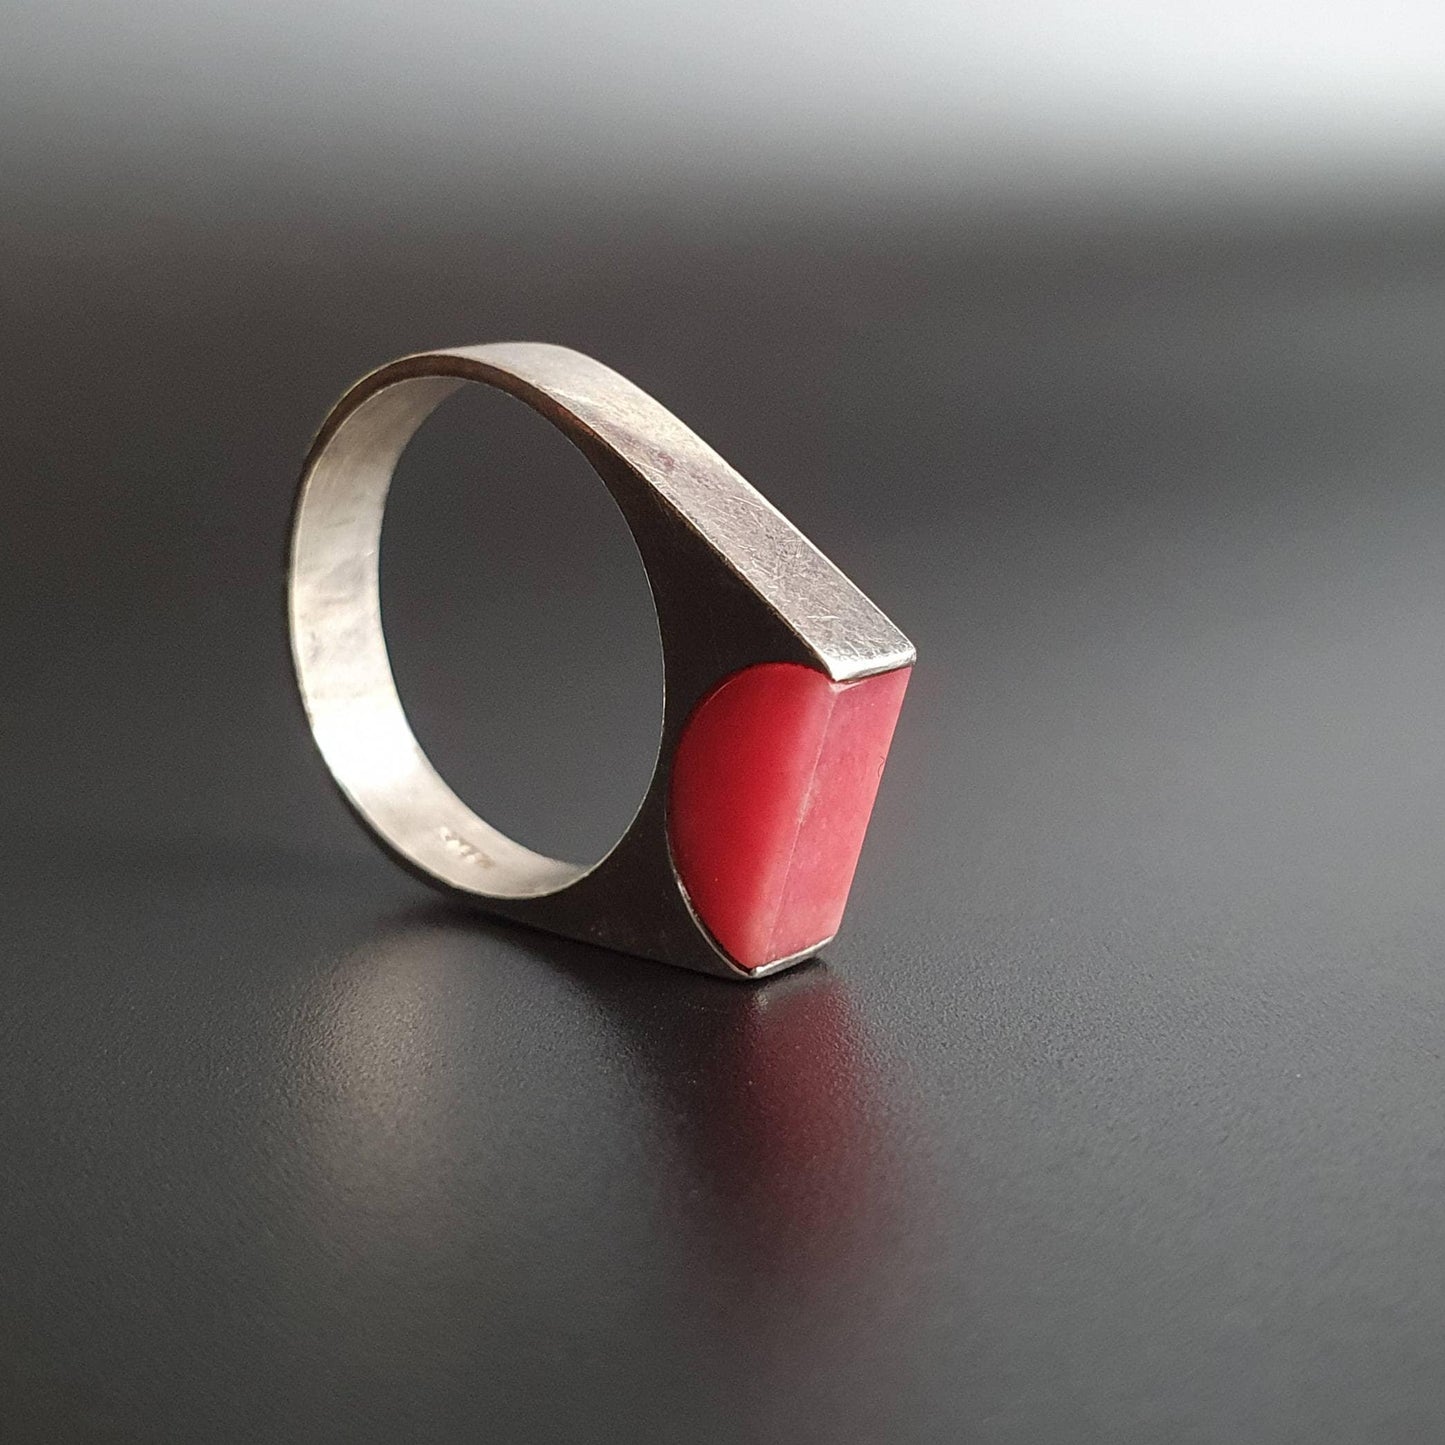 Statement ring, chunky ring, coral gemstone, silver jewellery, gift's, vintage, handmade, unique jewelry, sterling silver ring, designer